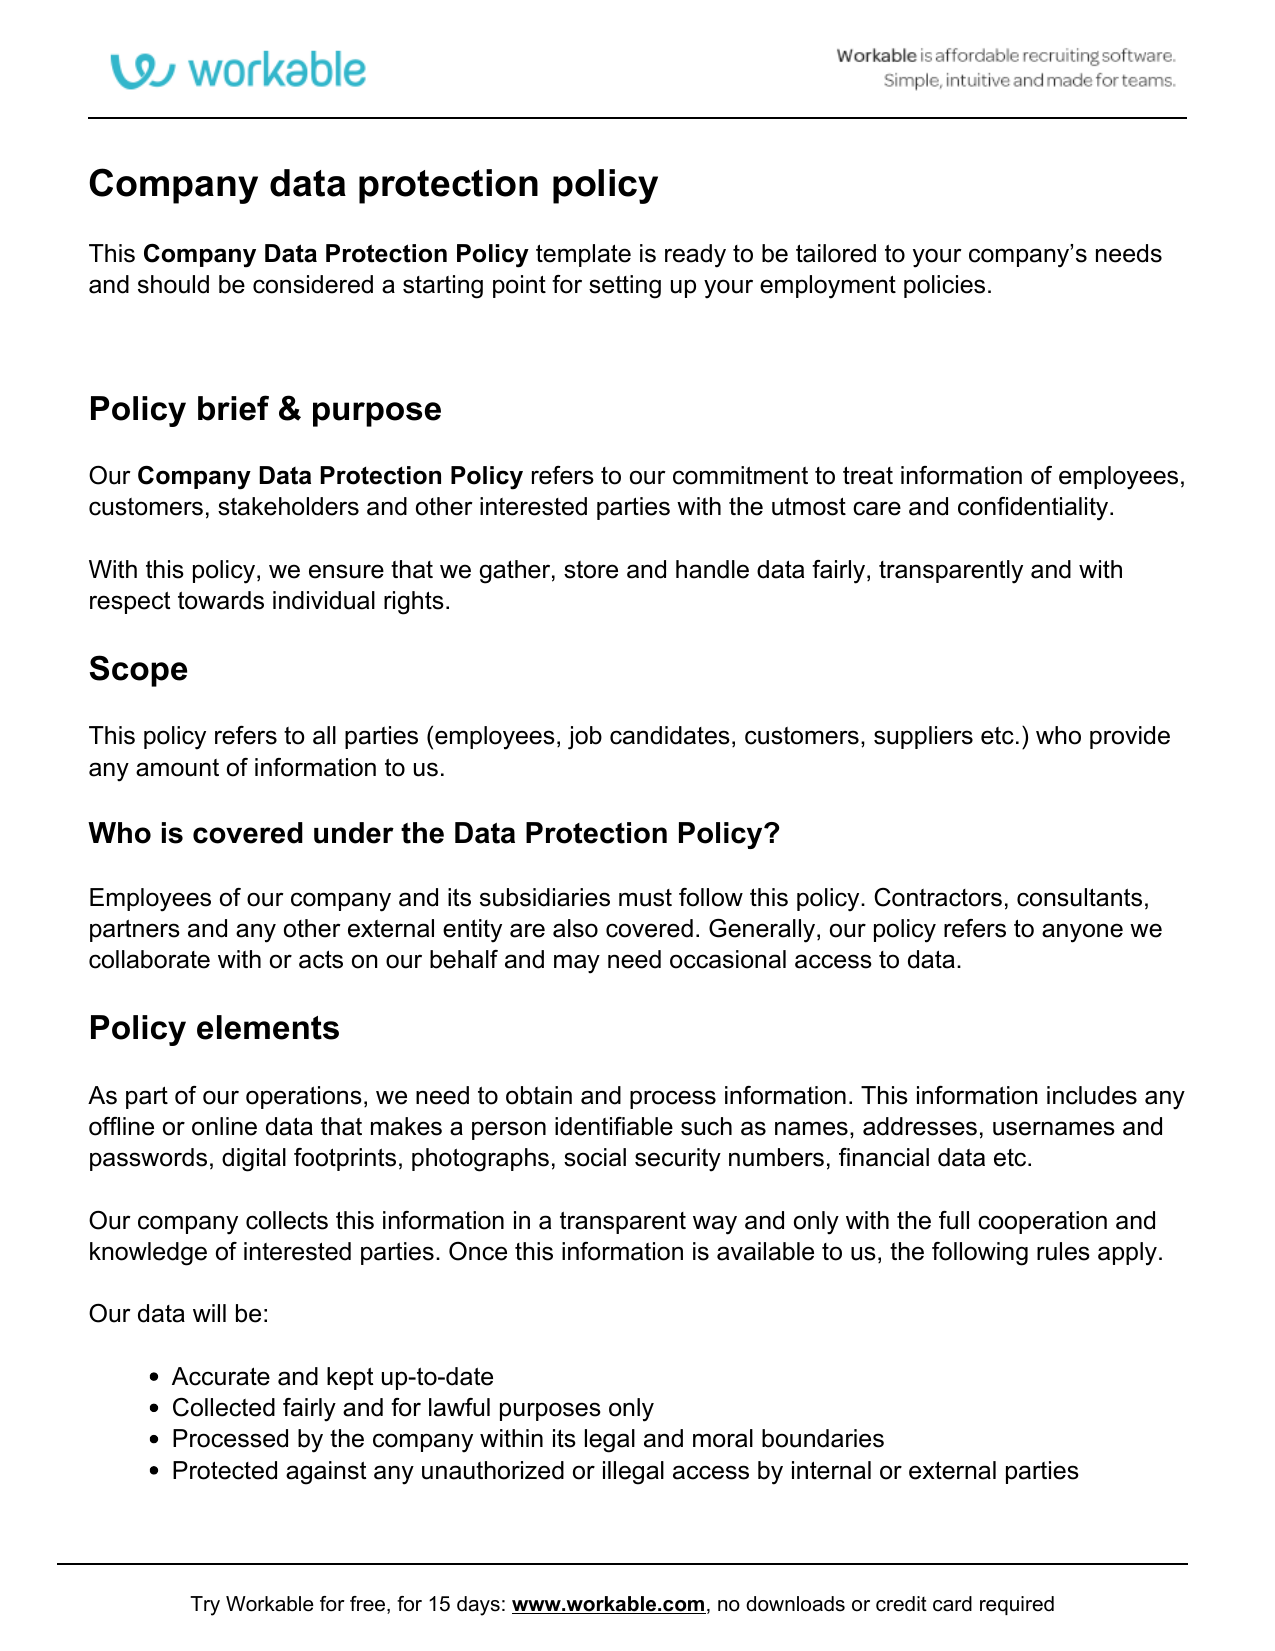 Customer Data Privacy Policy Template